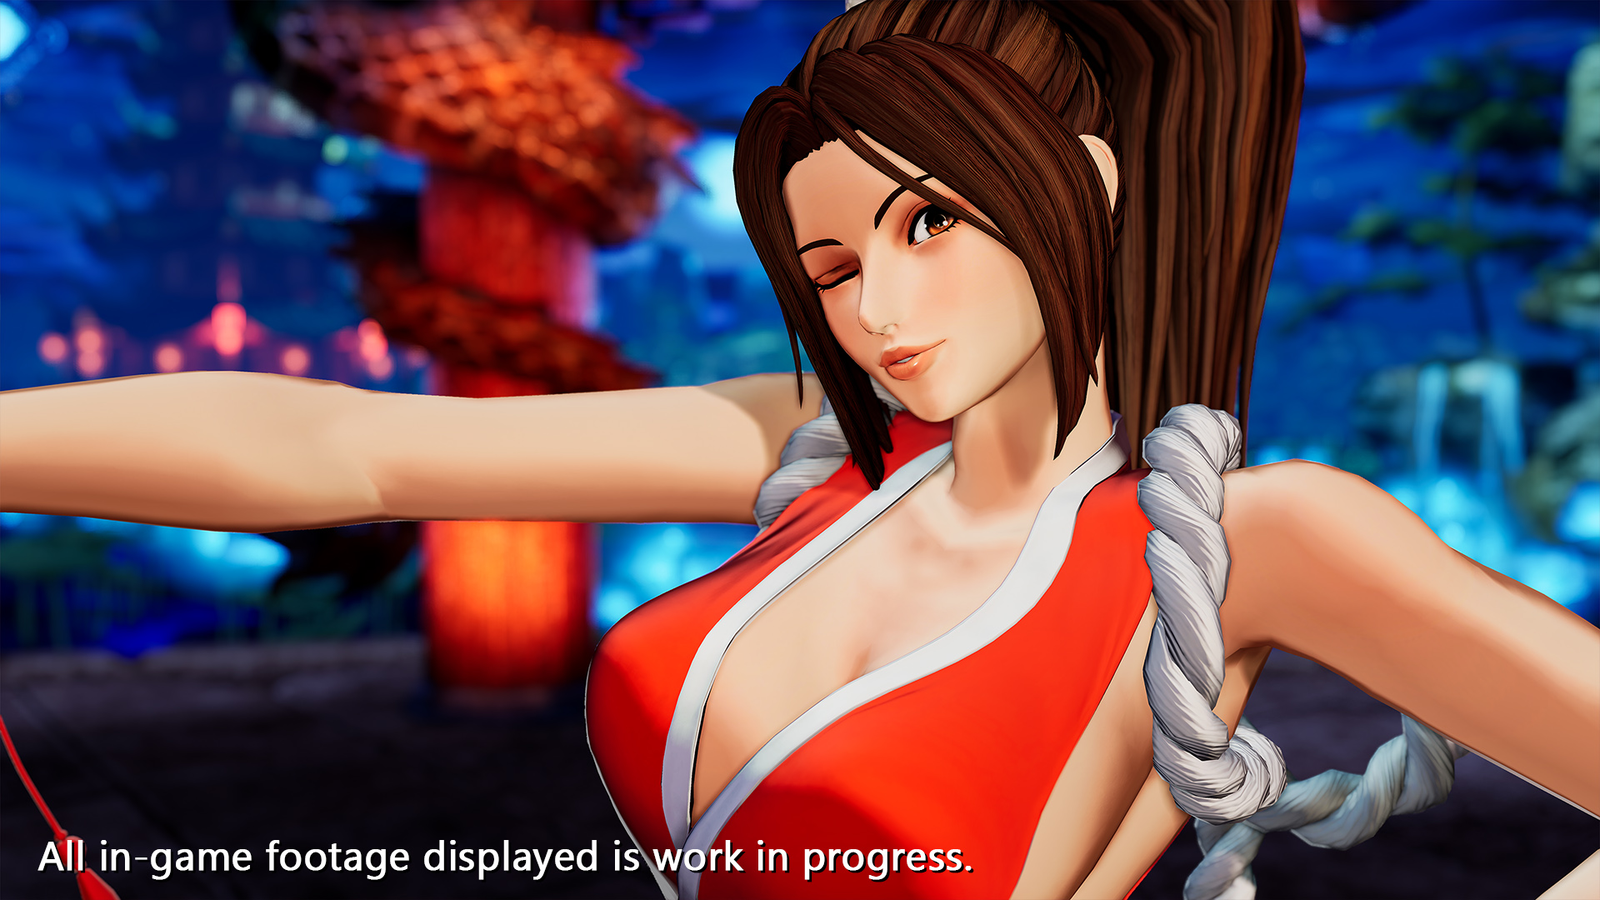 King of Fighters 15 launches February 2022, coming to PlayStation